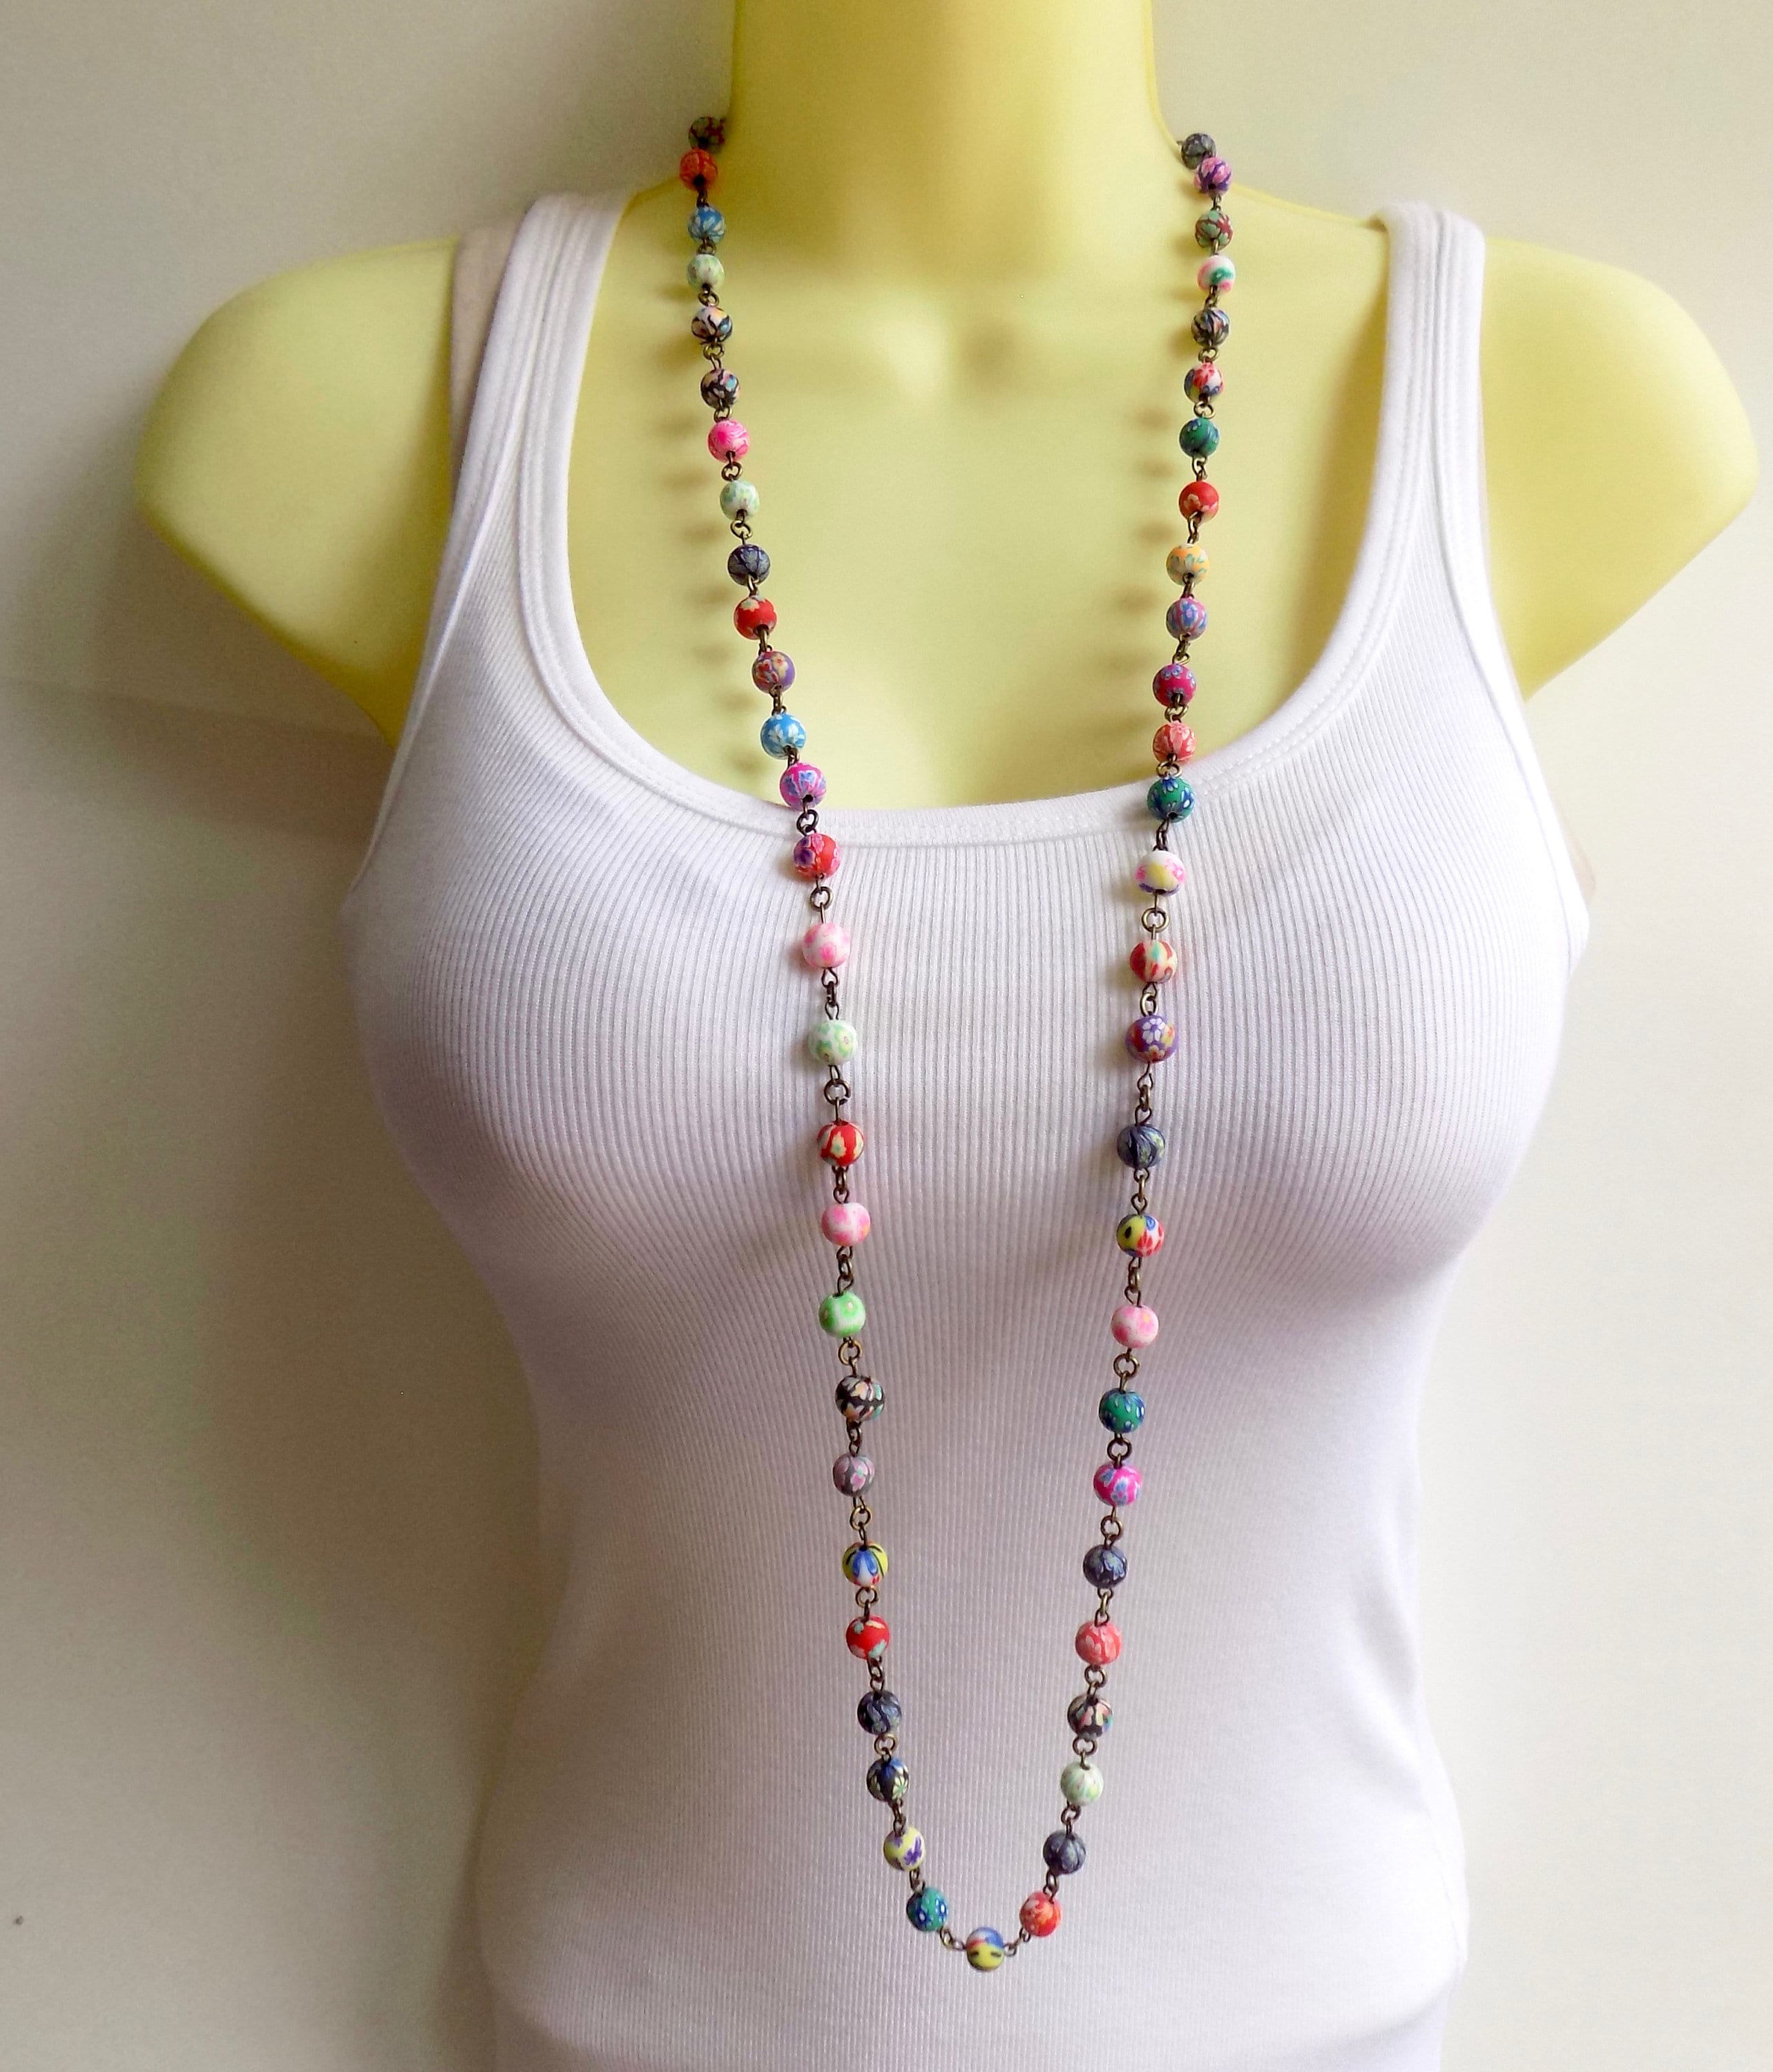 How To Make A Long Beaded Necklace - Running With Sisters